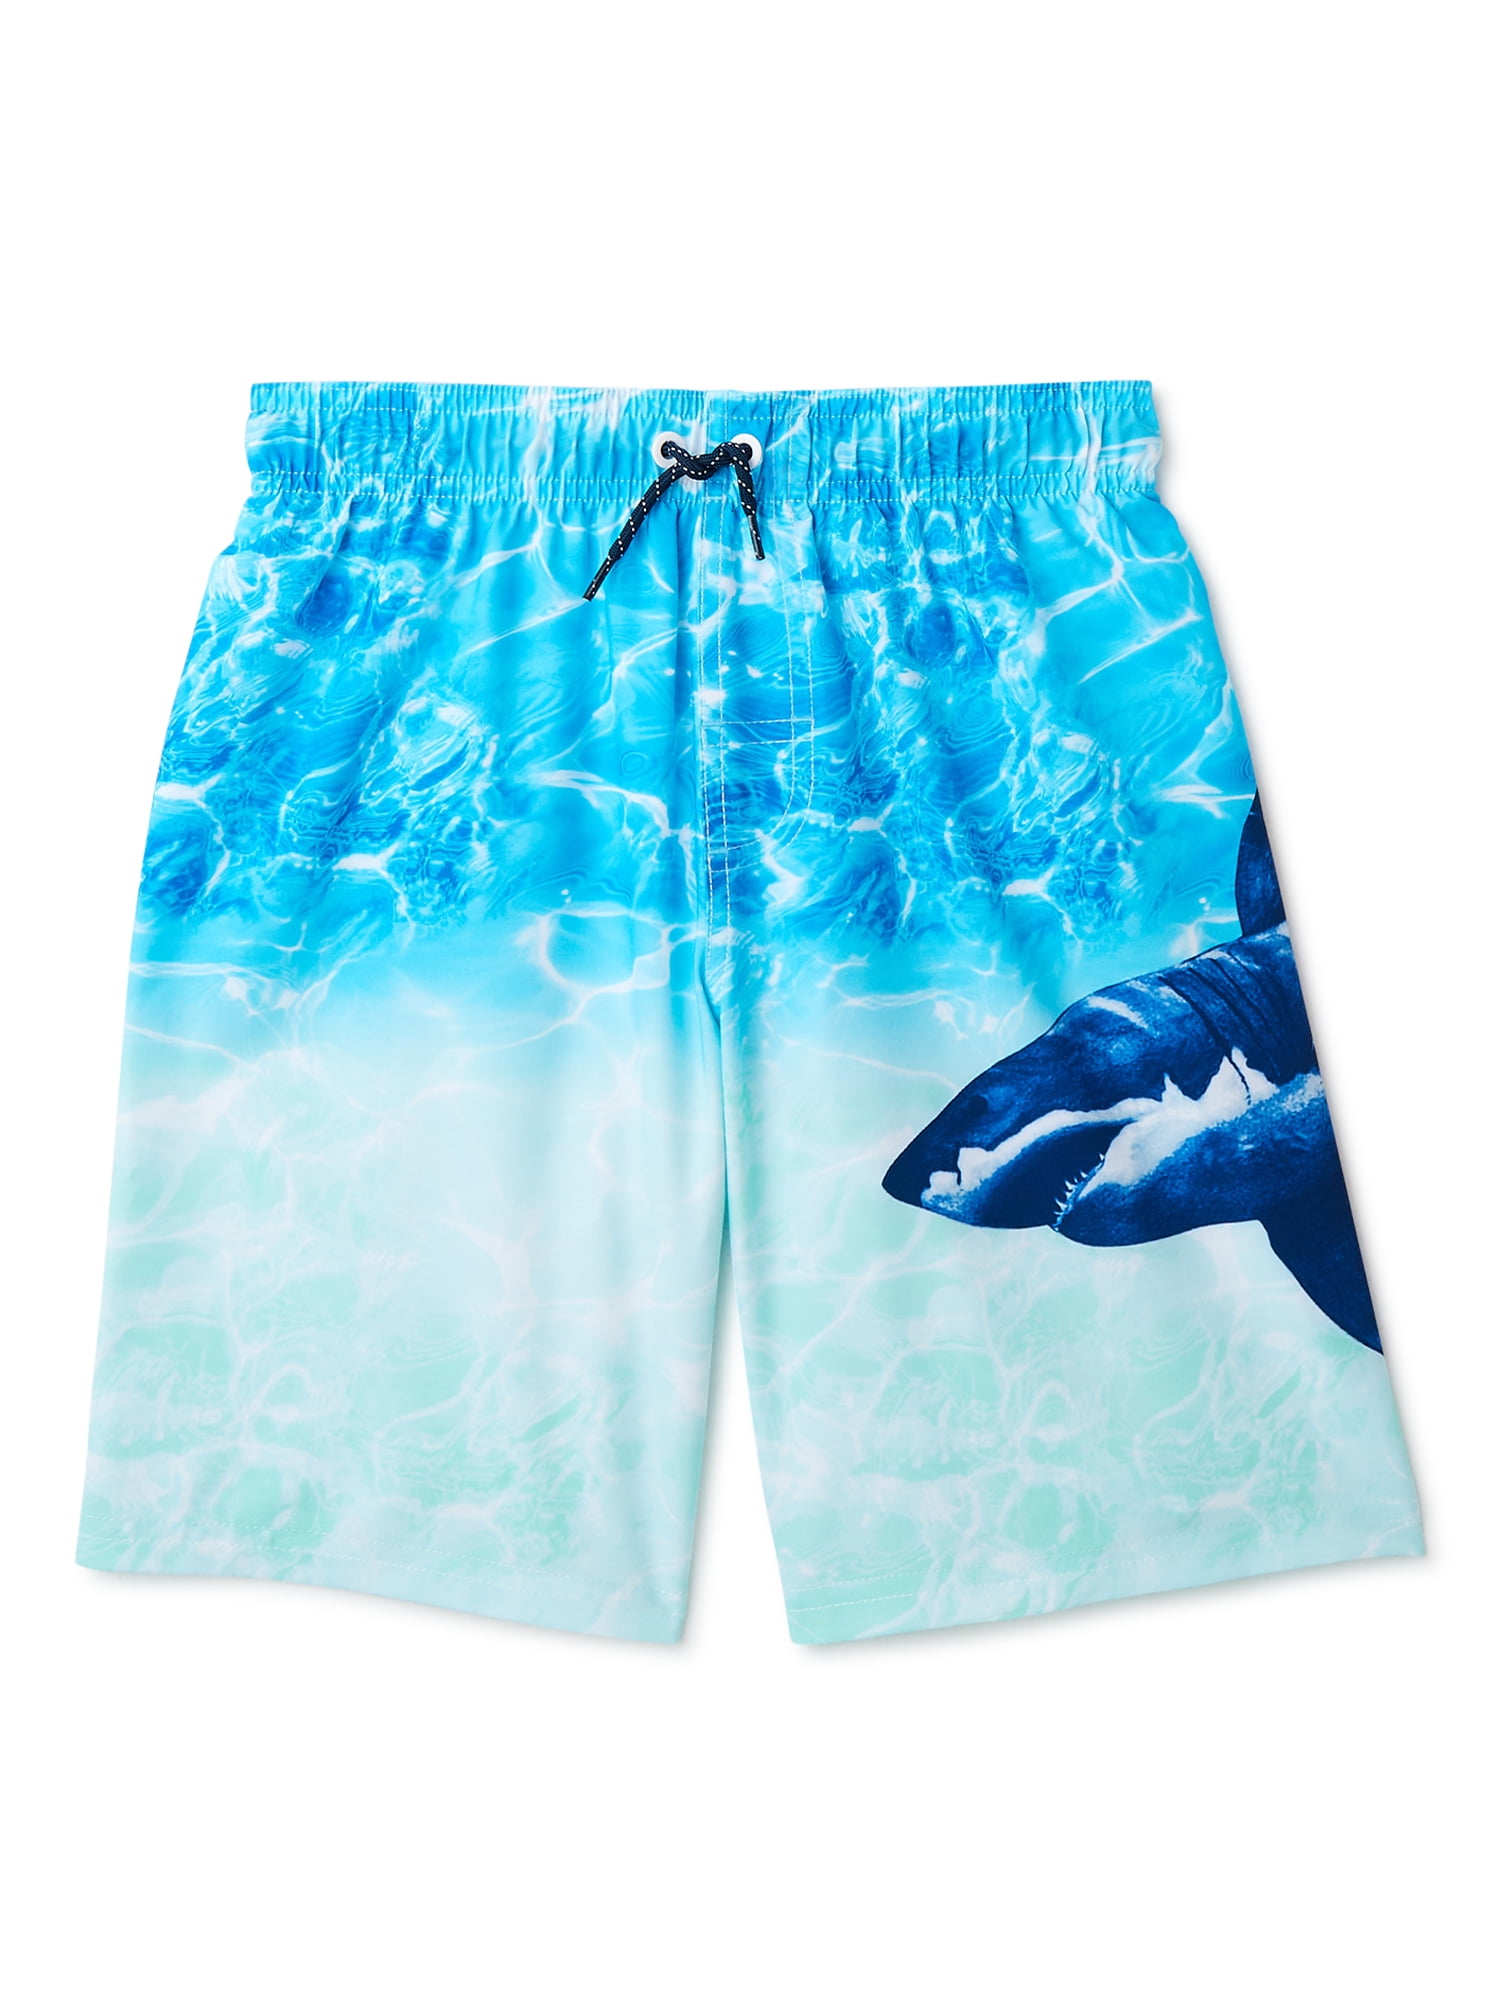 Details about   Wonder Nation Boys Swim Trucks Board Shorts Assorted Graphic Printed XS S 